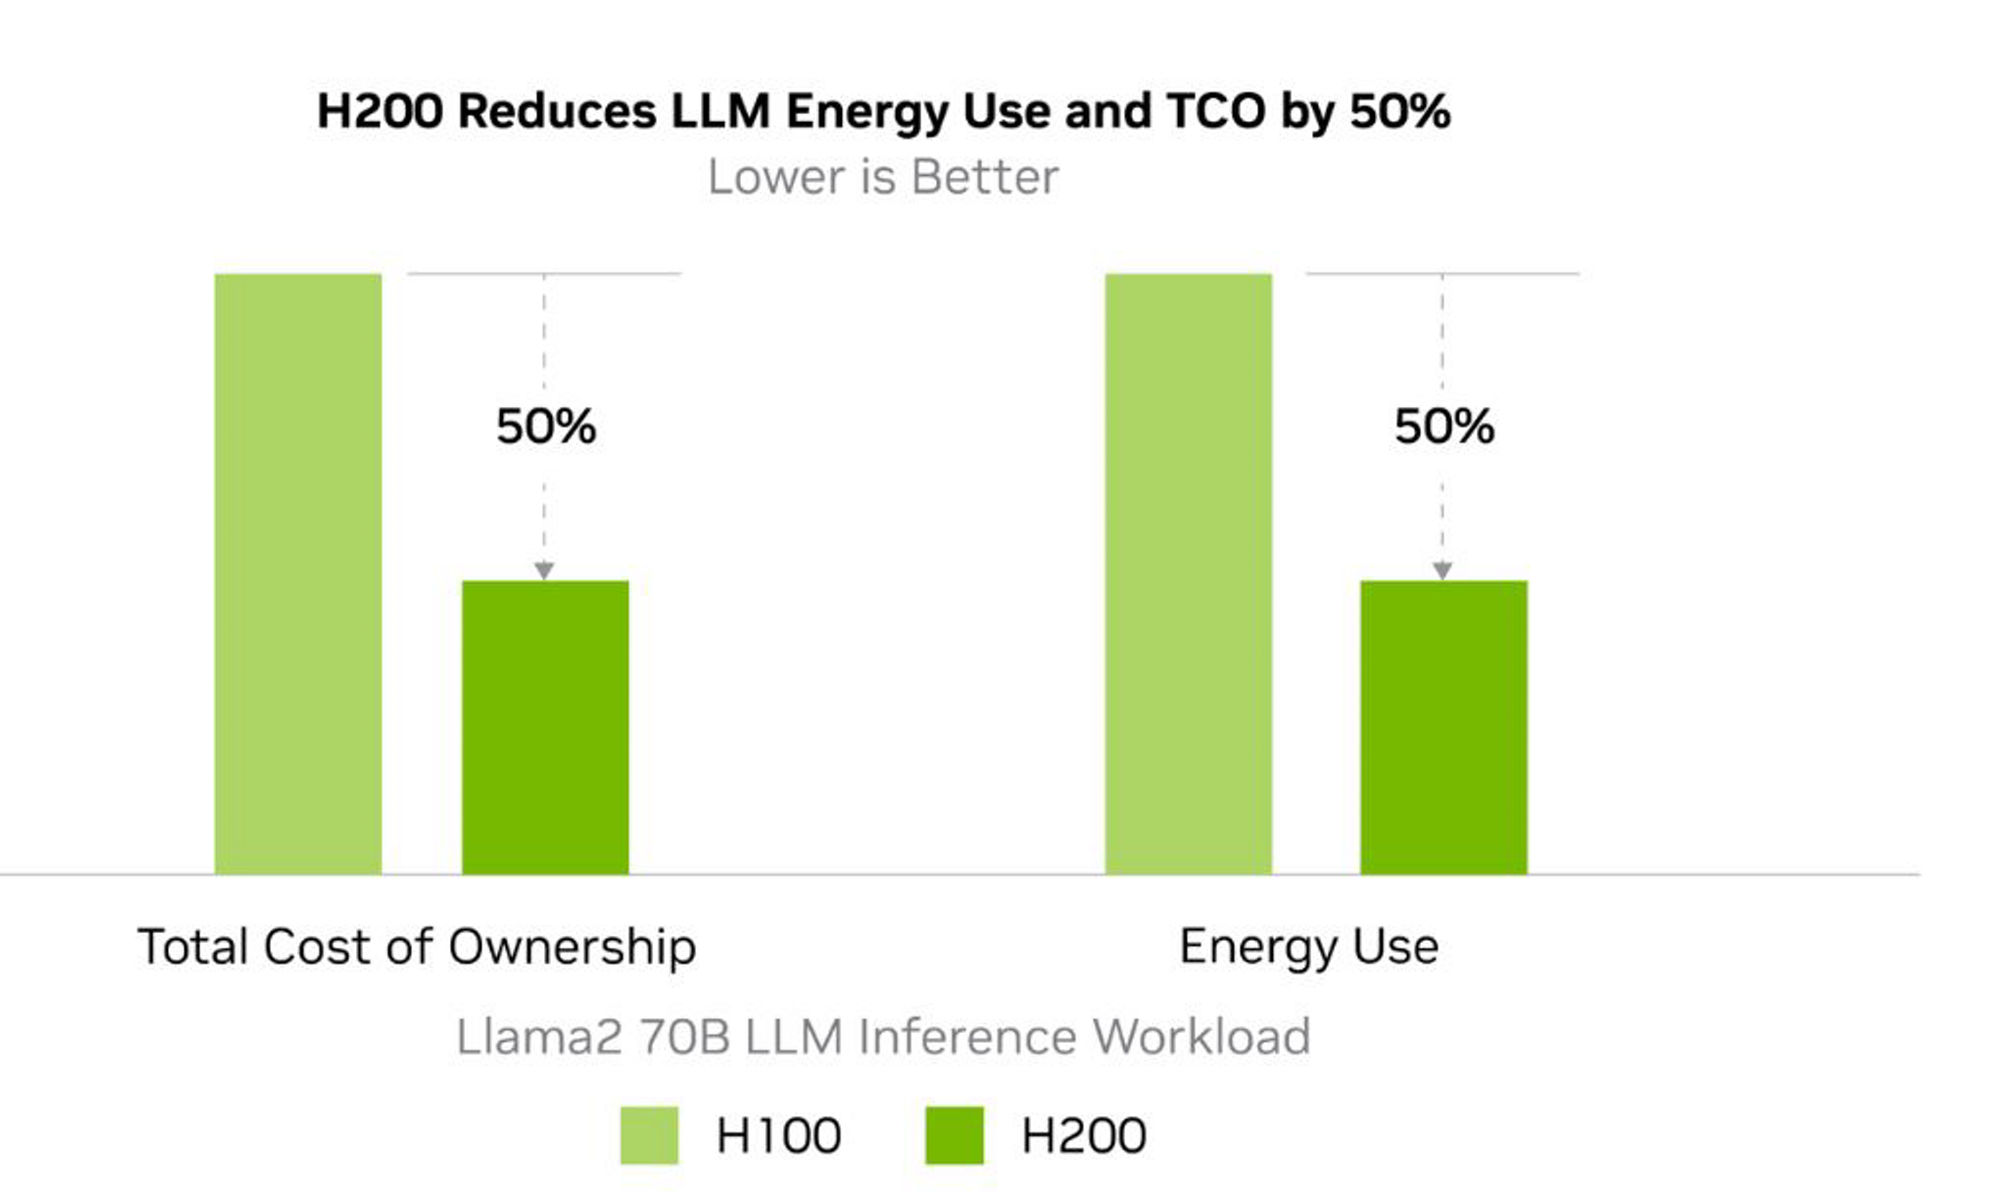 h200 reduces LLM energy use and tco by 50%